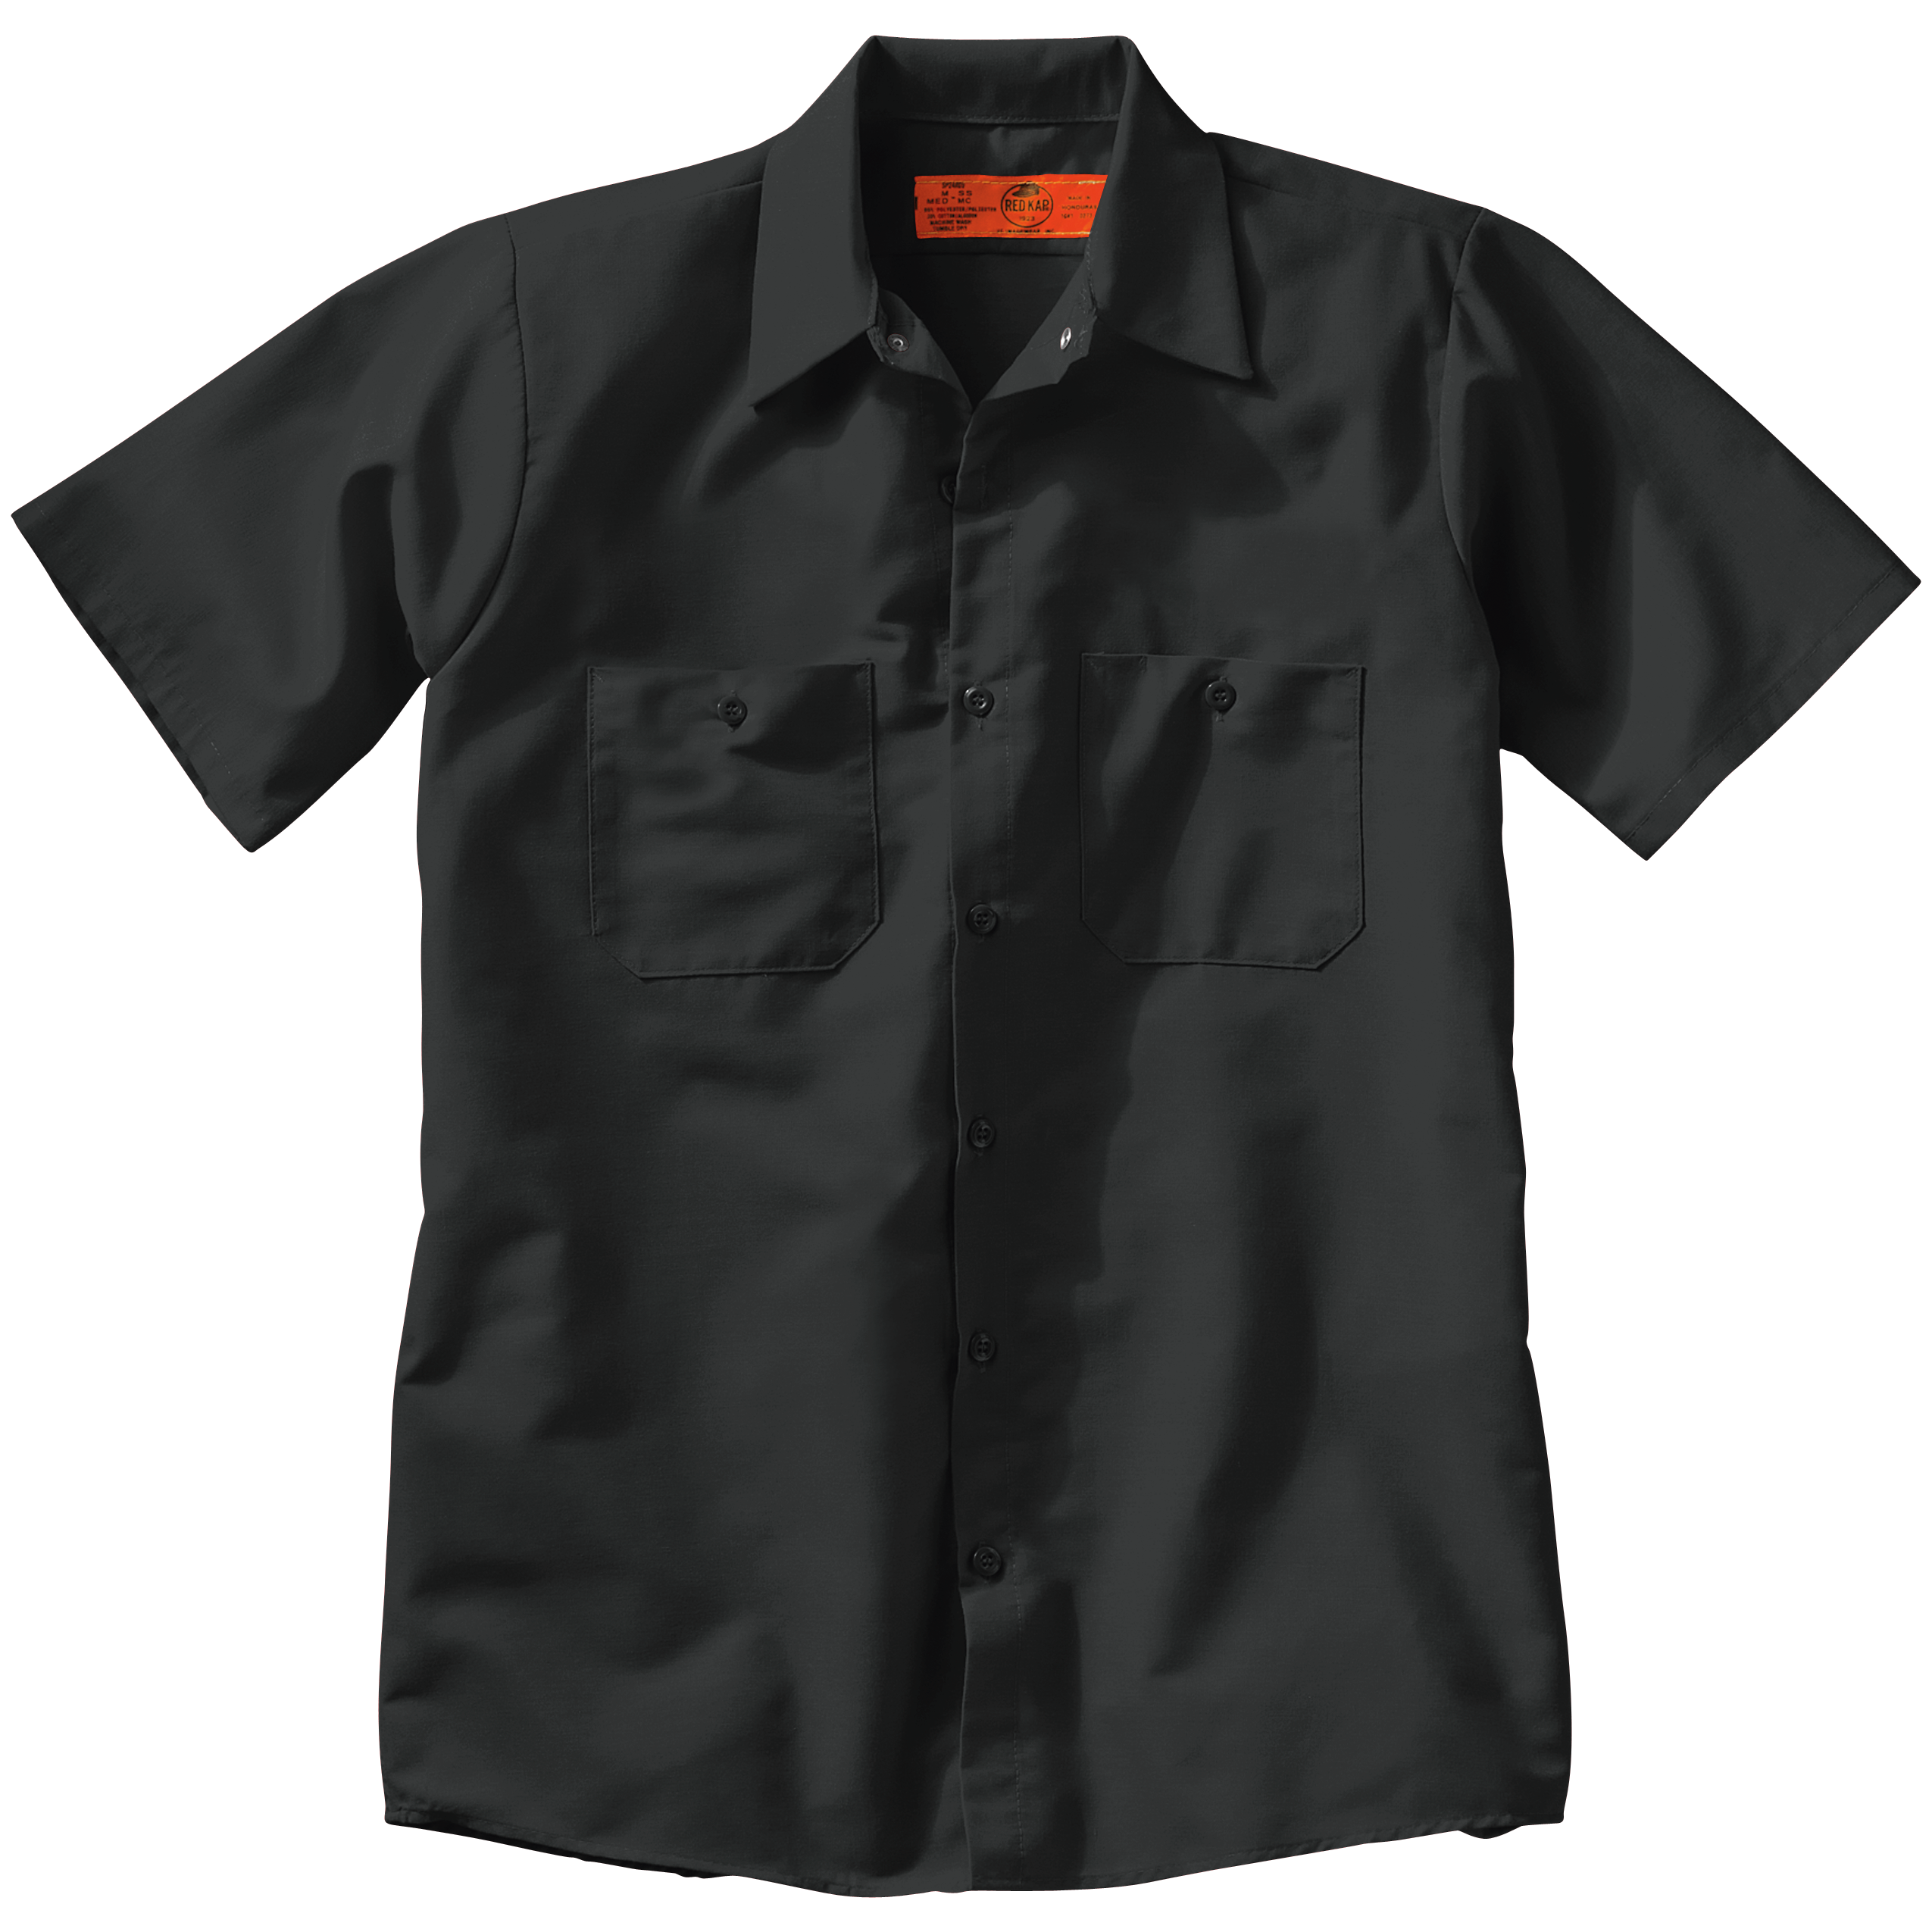 Custom Embroidered Industrial Work Shirts; RedKap, Cornerstone and Dickies,  Short Sleeve, Long Sleeve & Lined.